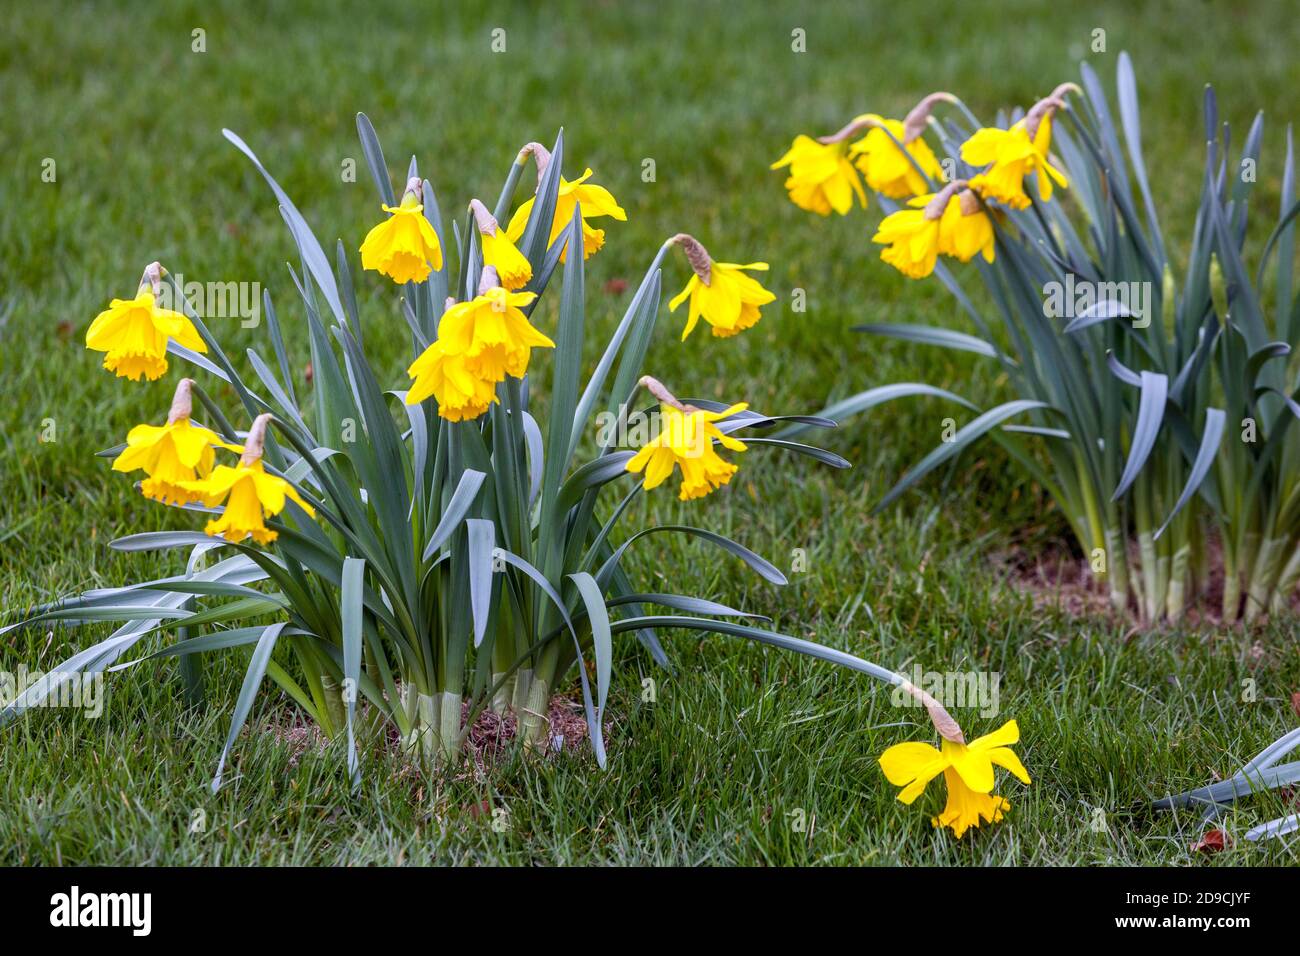 Yellow daffodils flowers blooming in spring garden lawn Narcissus flower Stock Photo